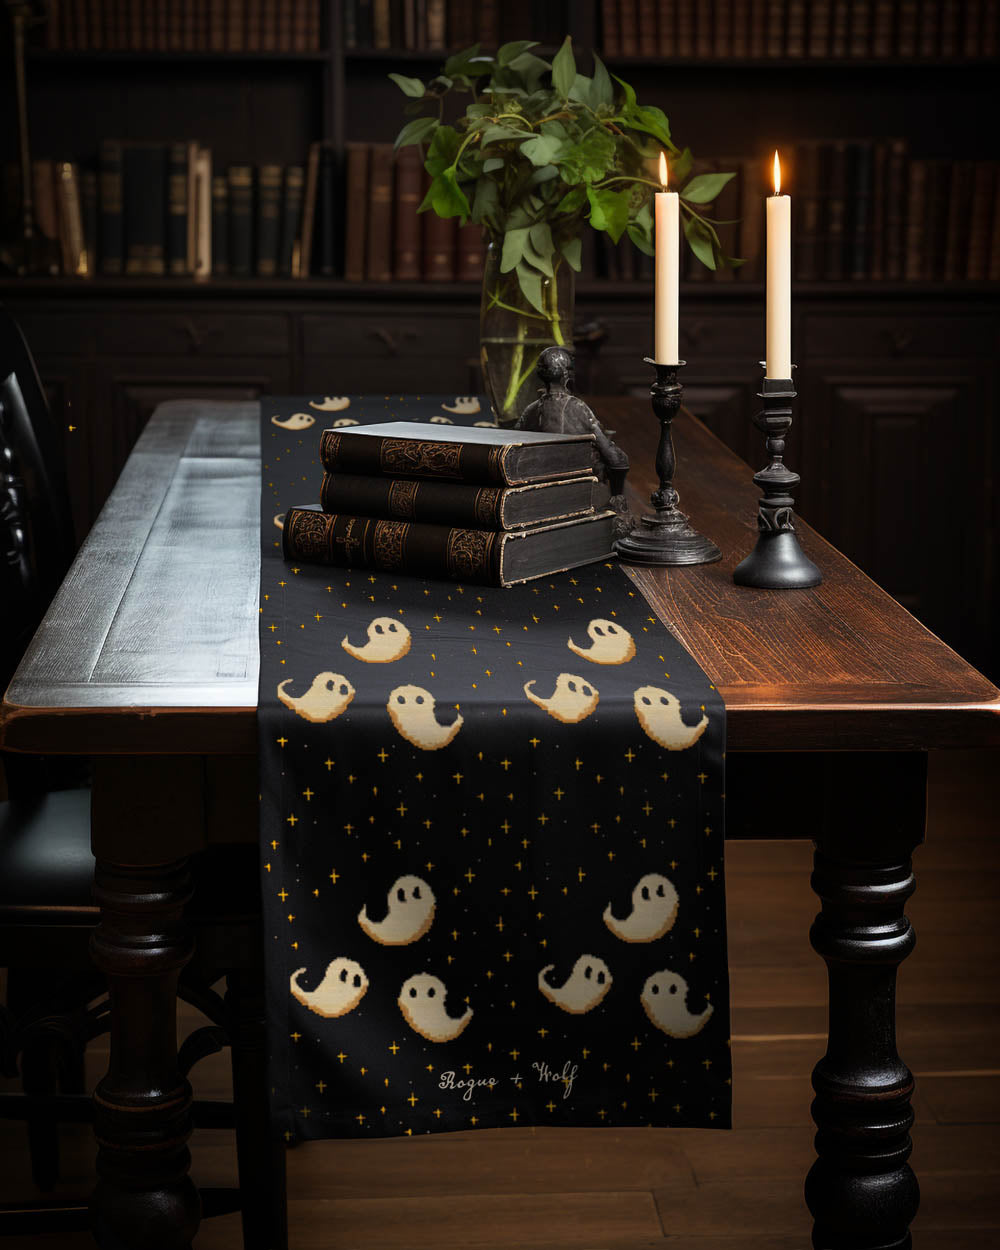 Spooky Soirée Table Runner - Witchy Dinner Table Setup - Gothic Kitchen Home Decor - Goth Christmas Gifts